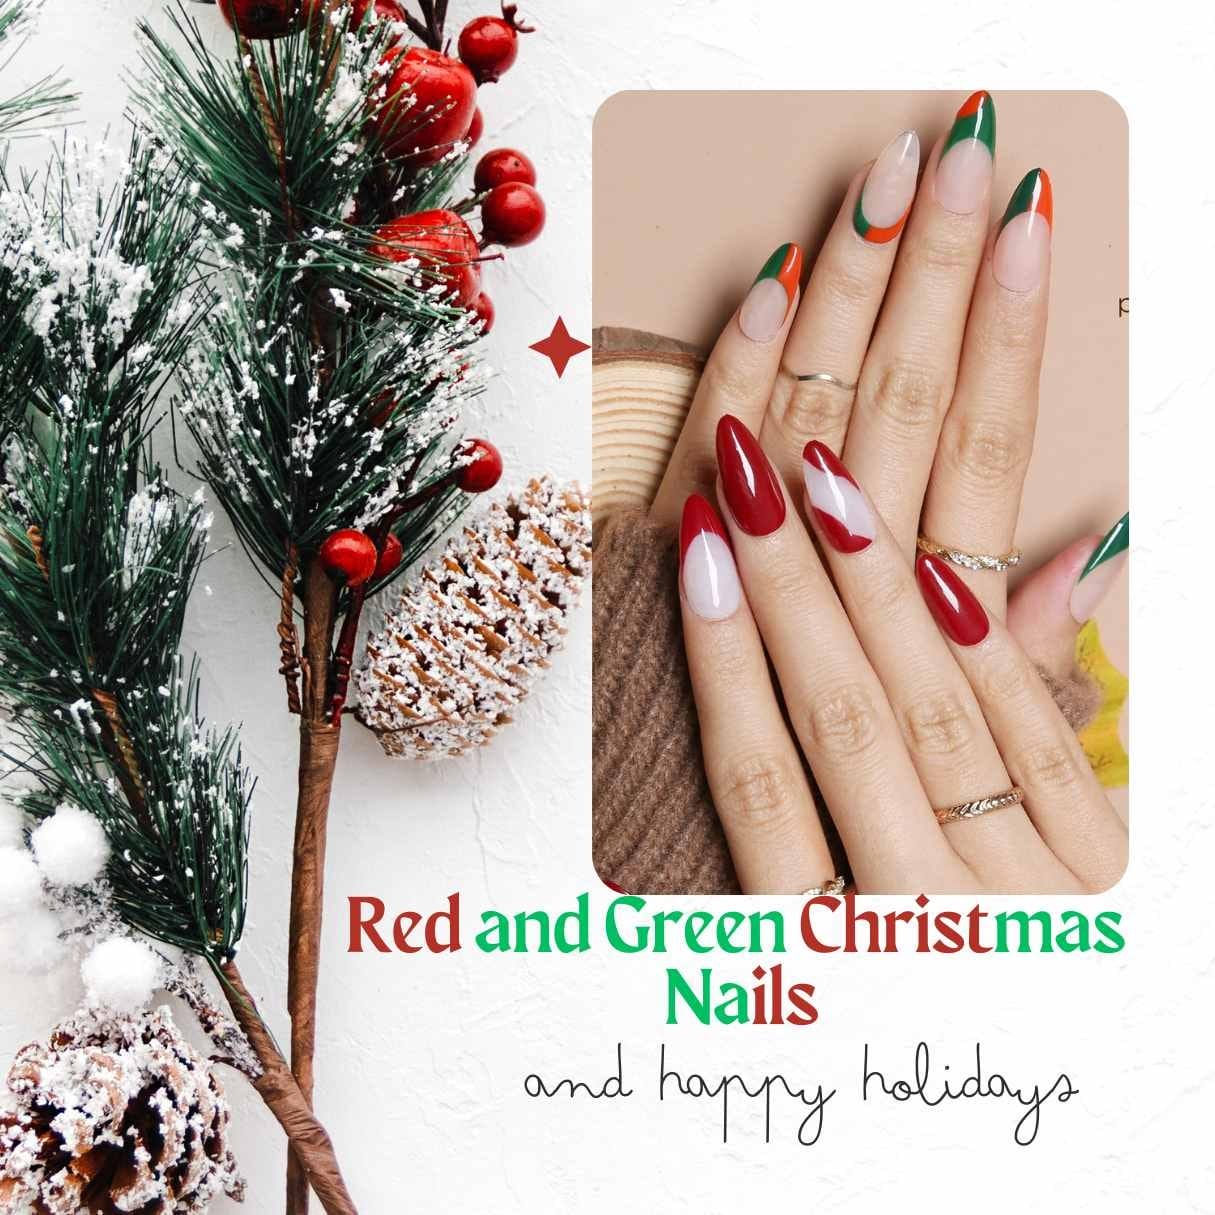 Red-and-Green-Christmas nails